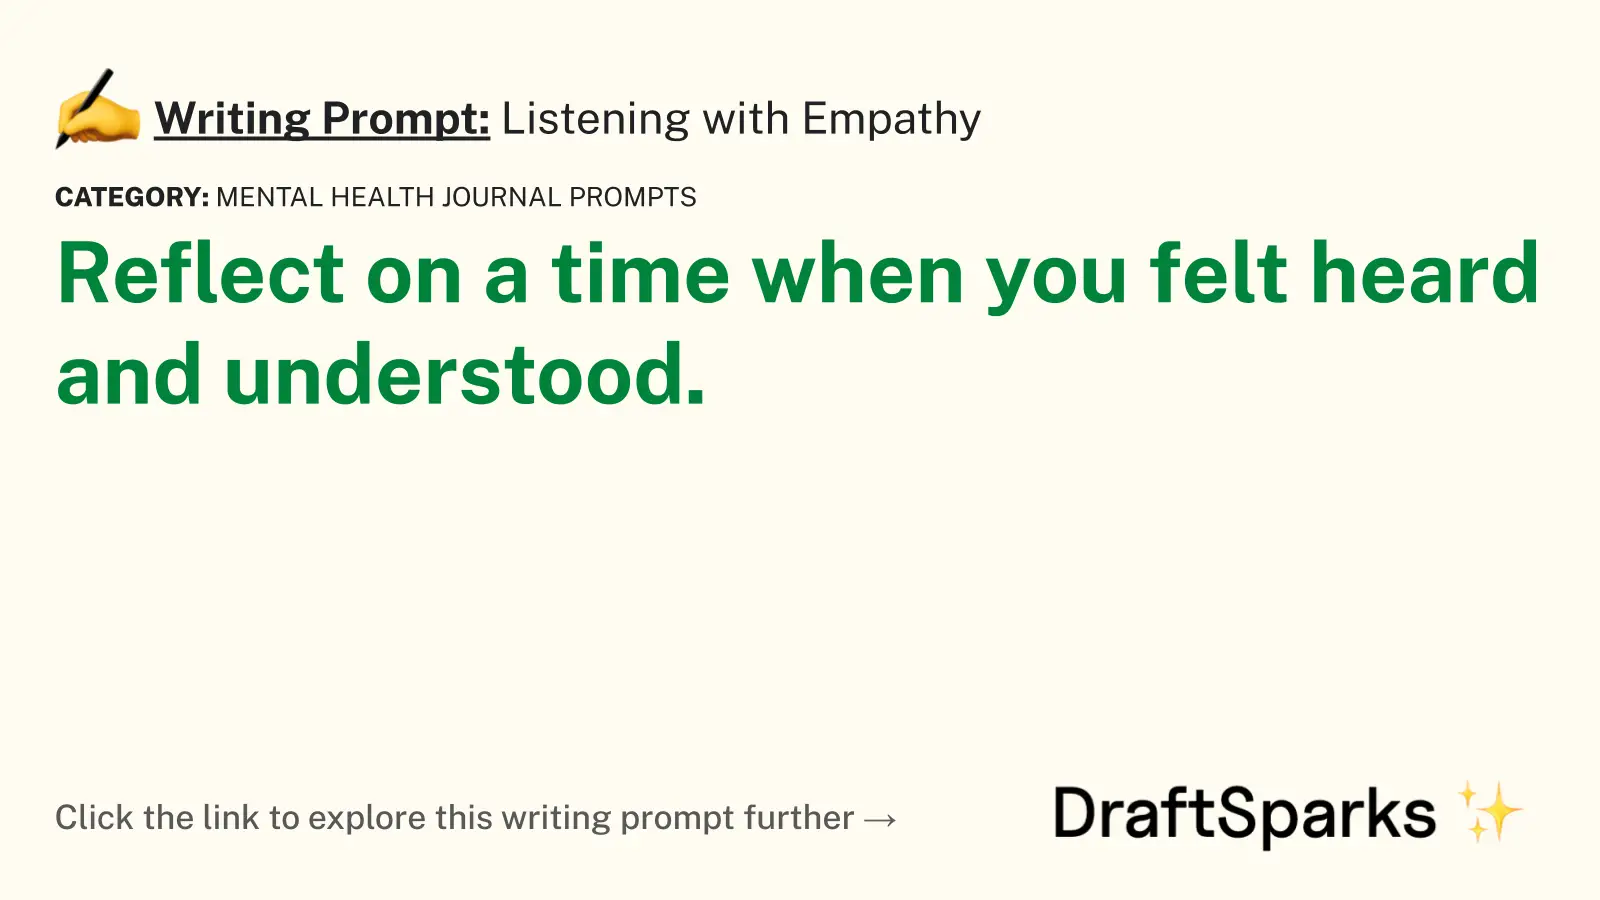 Listening with Empathy